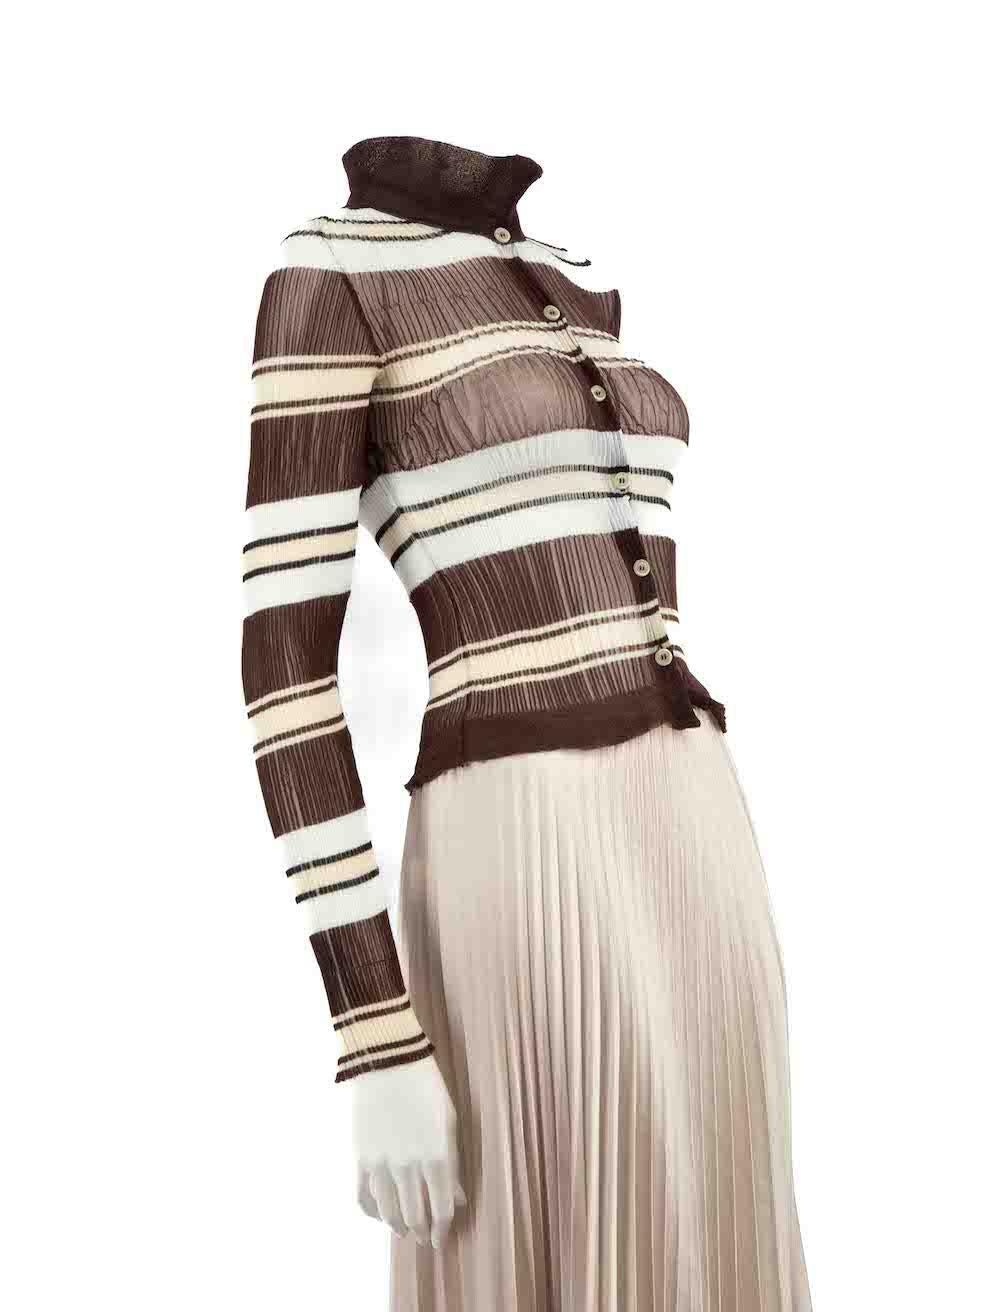 CONDITION is Never worn, with tags. No visible wear to top is evident on this new Jacquemus designer resale item.
 
 
 
 Details
 
 
 Brown
 
 Synthetic
 
 Top
 
 Striped pattern
 
 Figure hugging fit
 
 Stretchy
 
 Long sleeves
 
 Button up